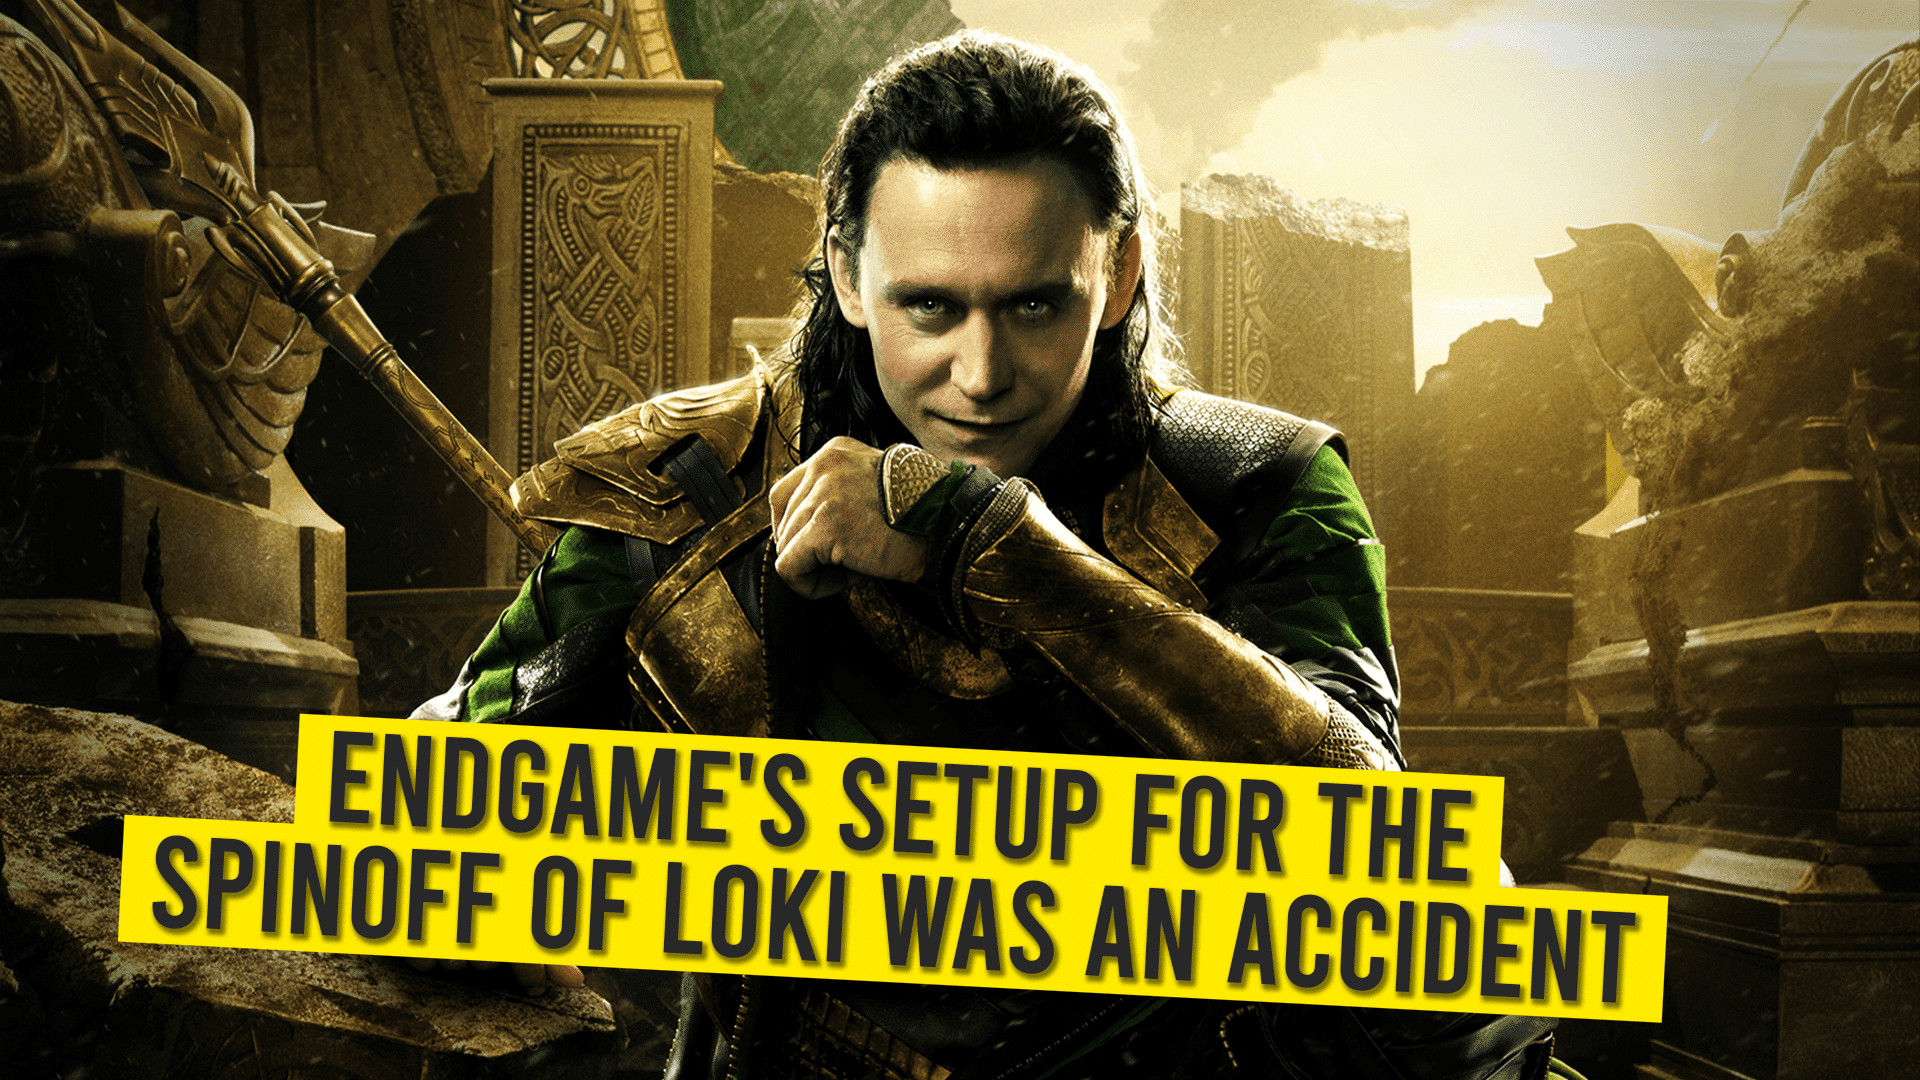 01 Endgames Setup For The Spinoff Of Loki Was An Accident